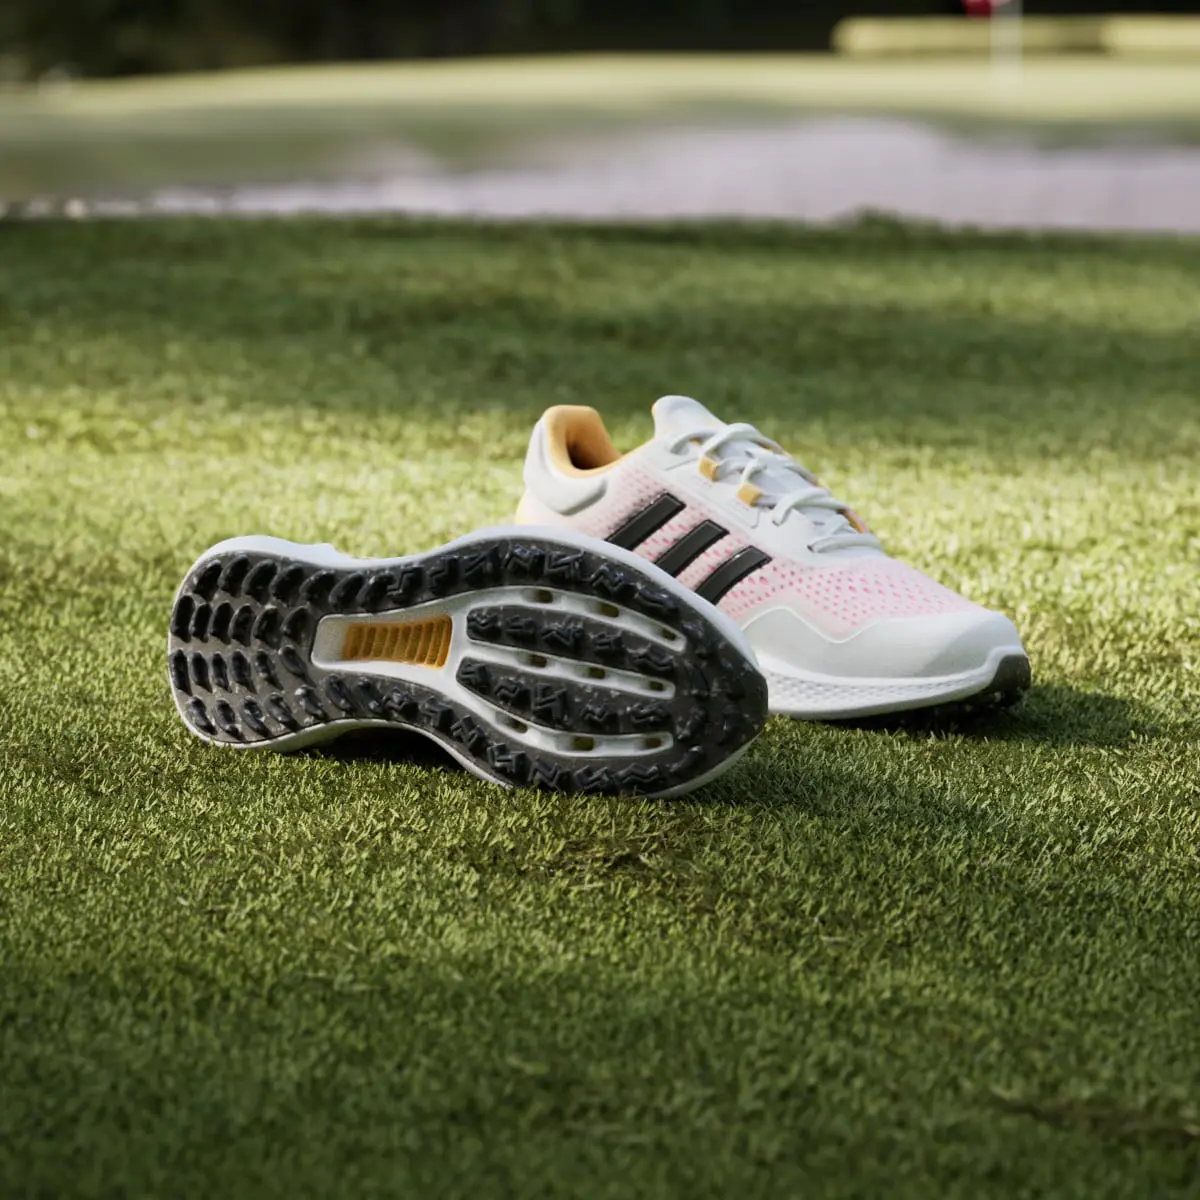 Adidas Summervent 24 Bounce Golf Shoes Low. 3